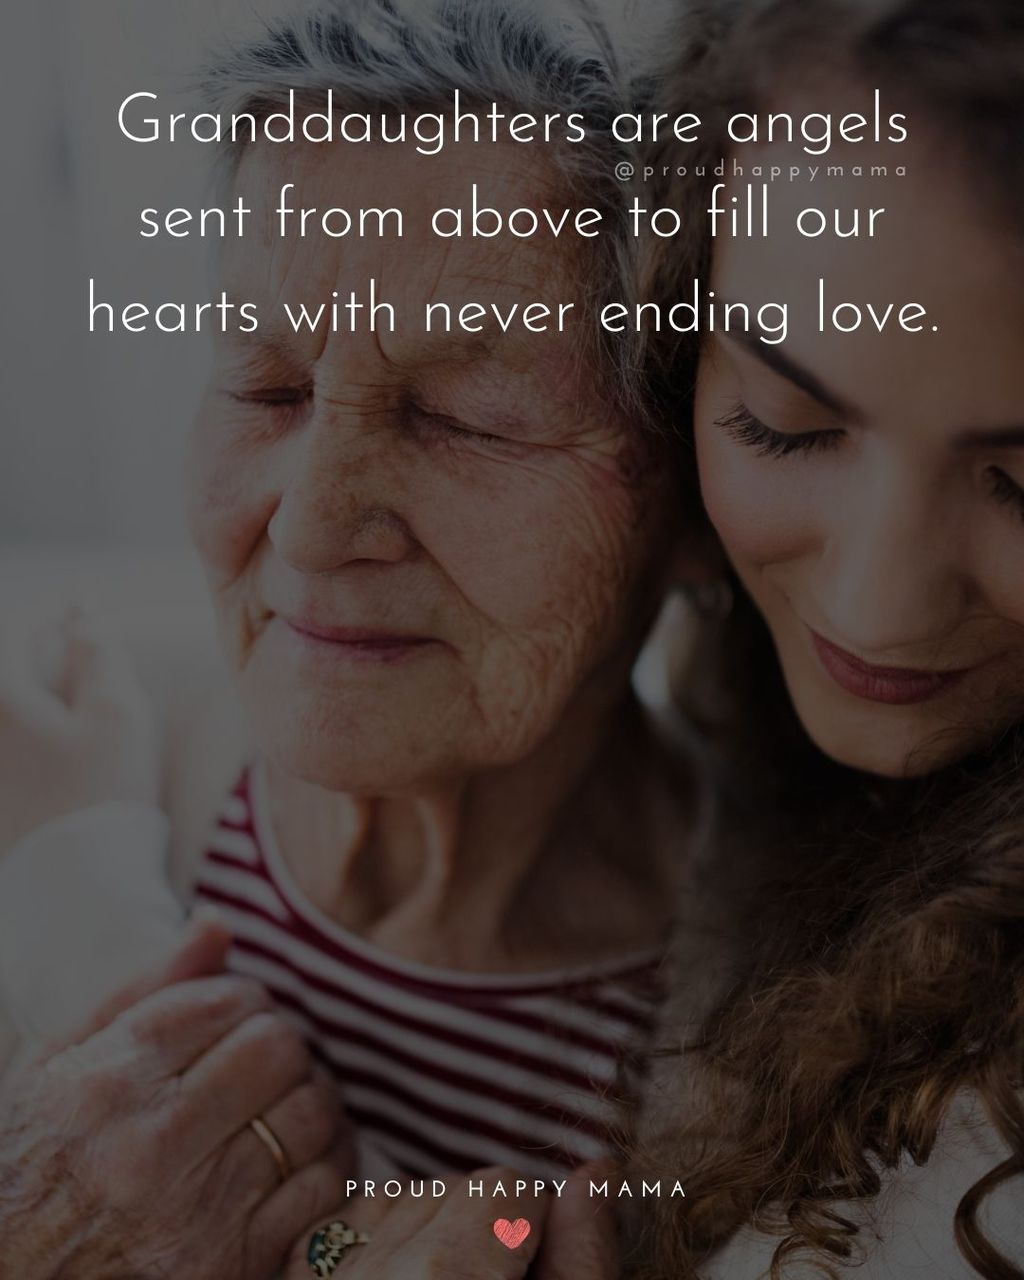 Adult granddaughter hugging elderly grandmother with text overlay. ‘Granddaughters are angels sent from above to fill our hearts with never ending love.’